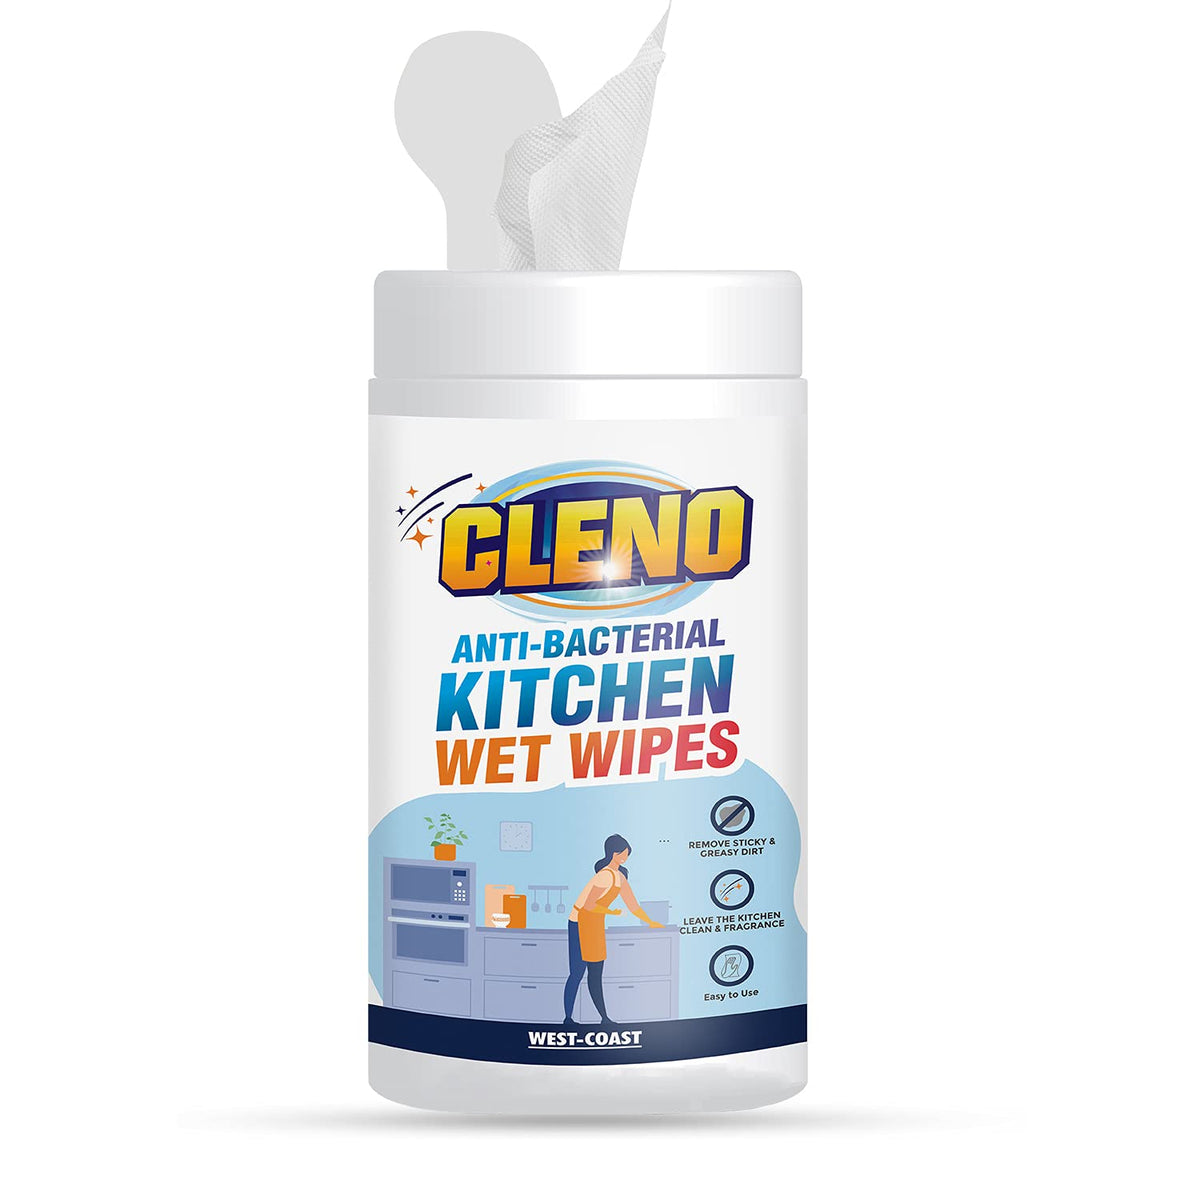 Cleno Kitchen Wet Wipes to Clean Sticky, Greasy Dirt on Kitchen Platform, Shelves, Jars, Floor, Sink - 50 Wipes (Pack of 2 ) (Ready to Use)